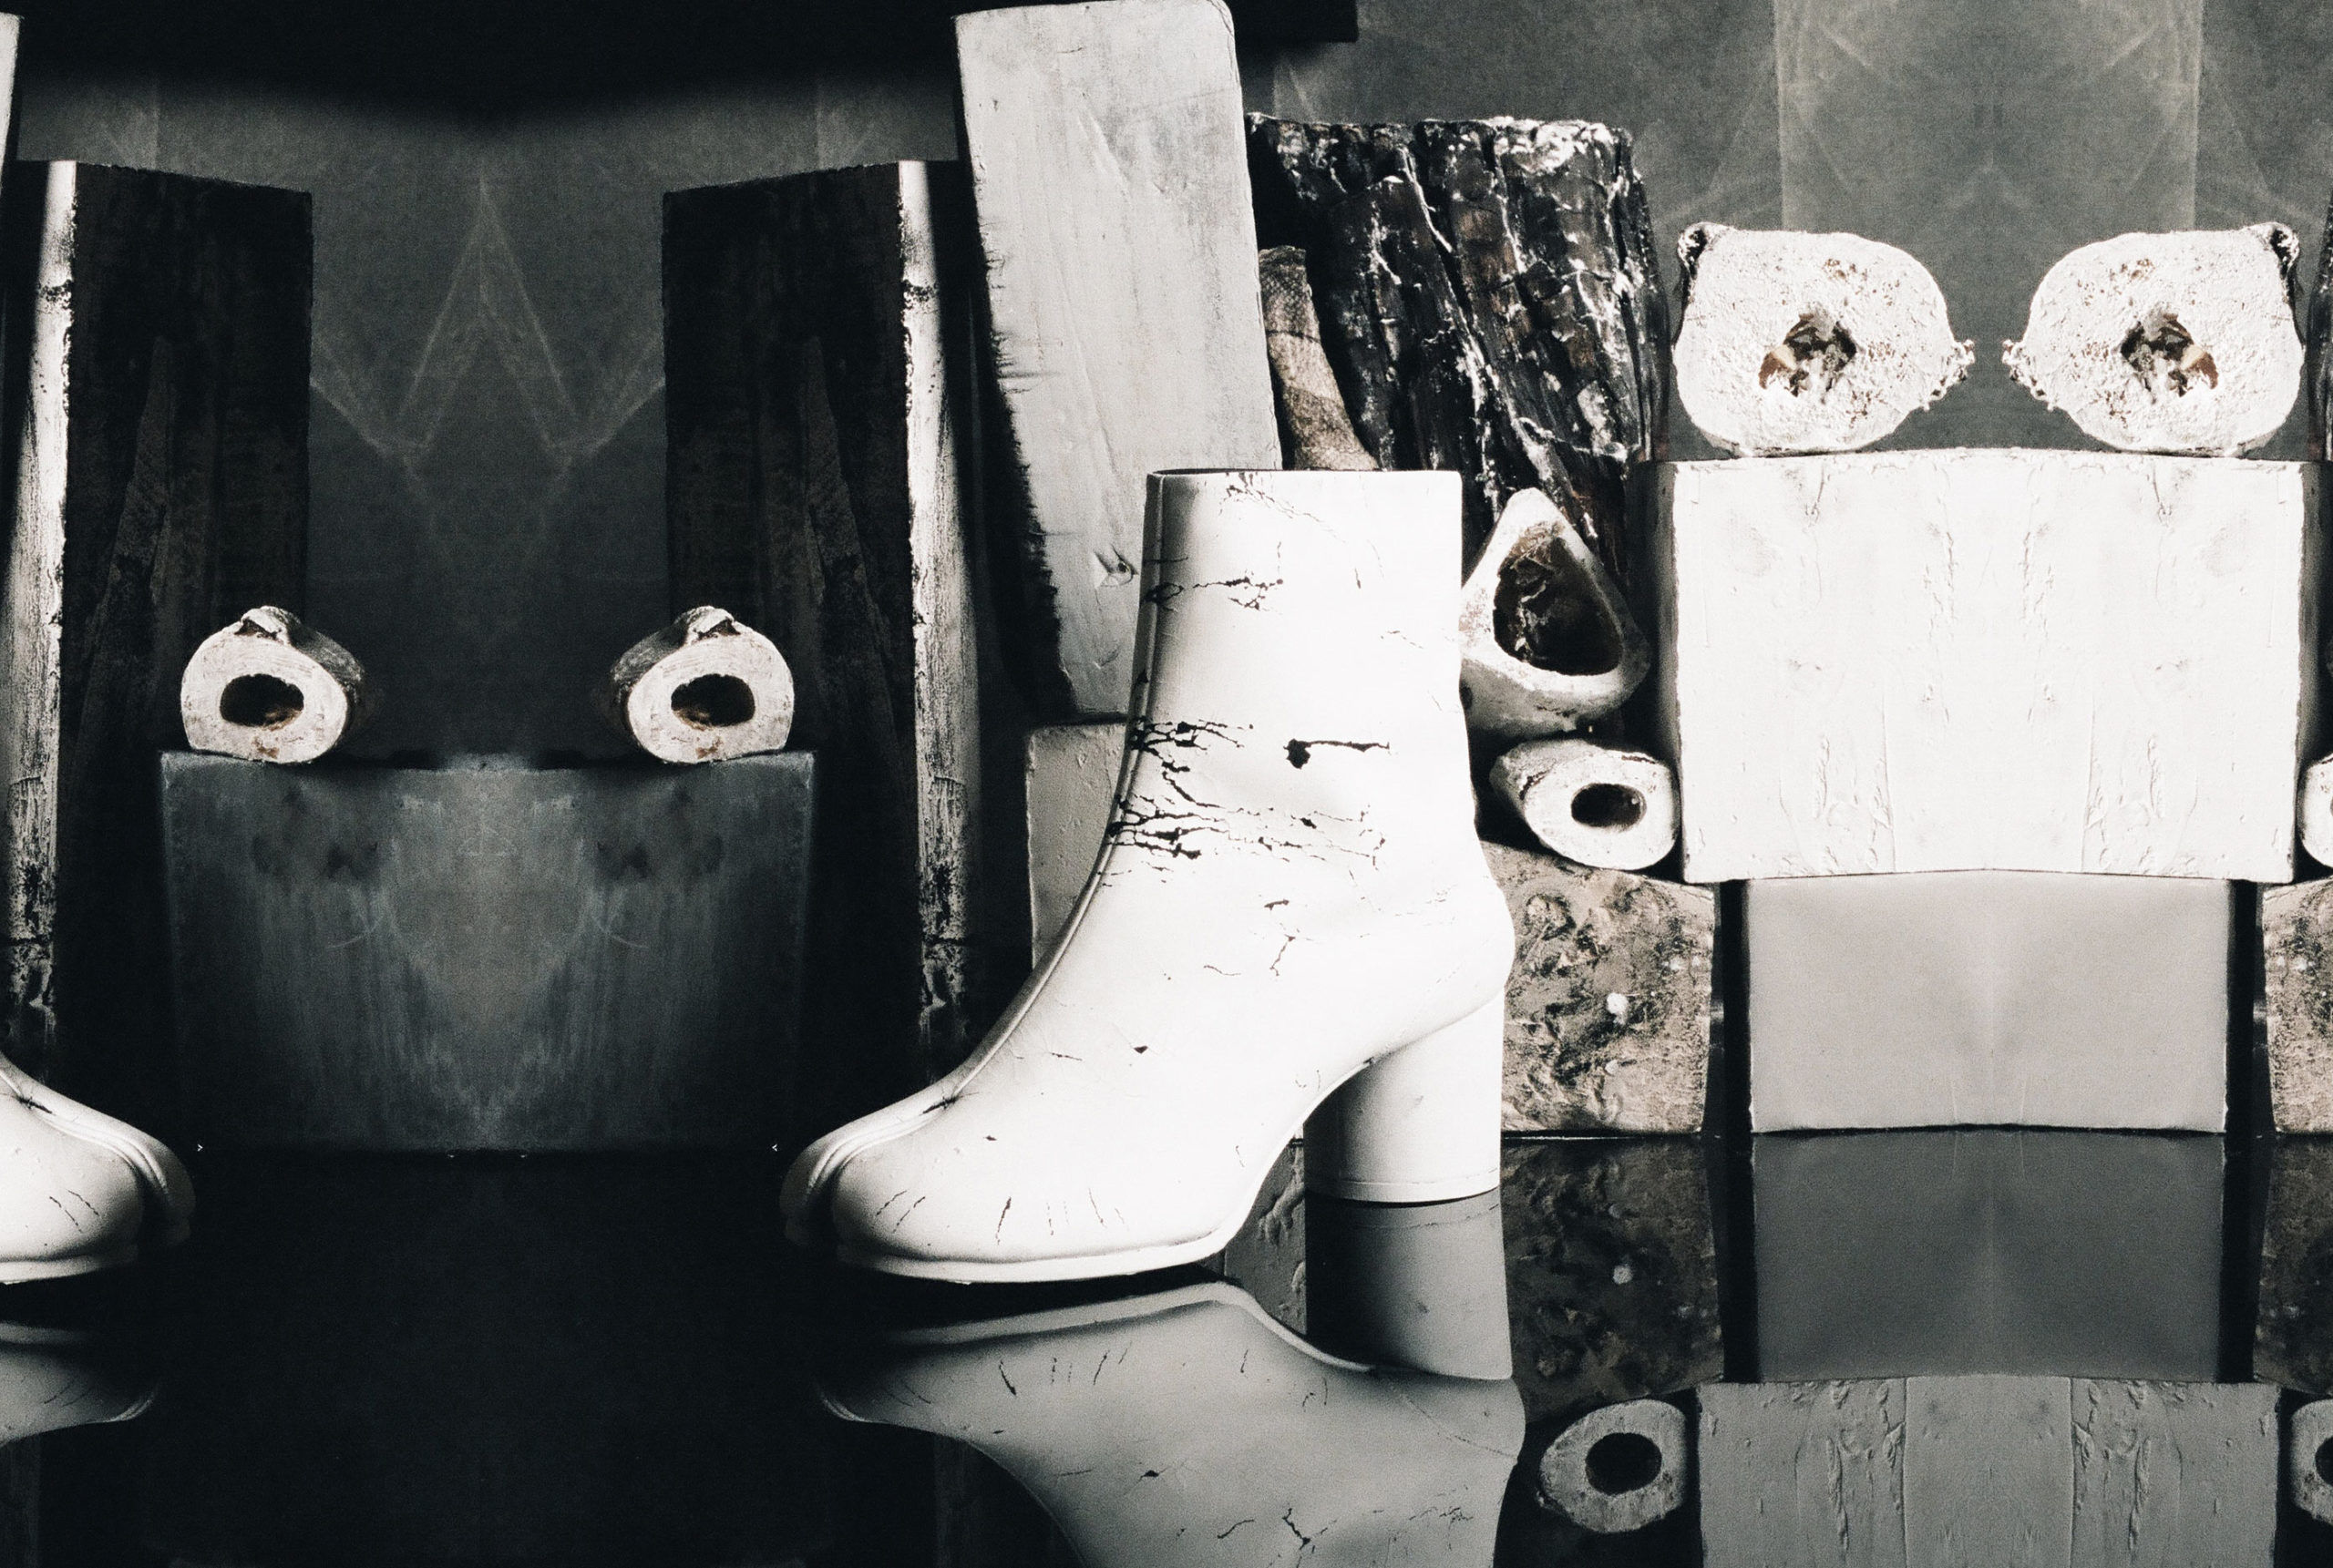 What Martin Margiela can teach us about sustainability